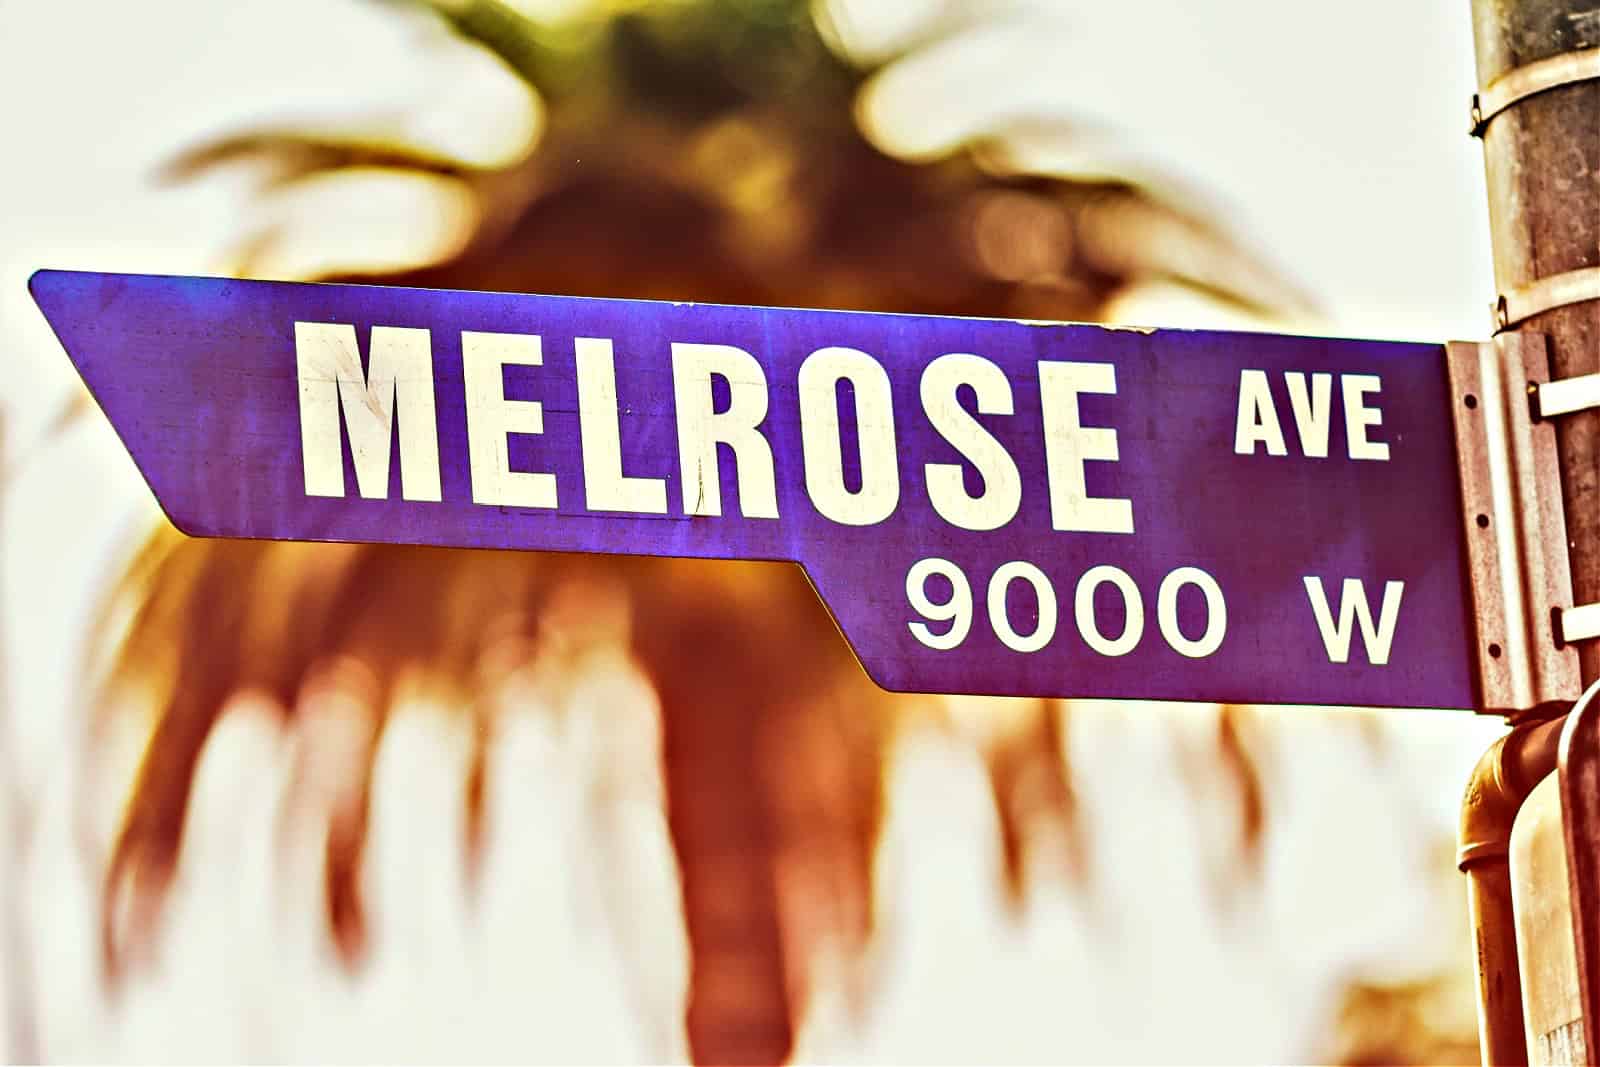 Melrose Avenue Street Sign Day. A street sign marking the famous Melrose Avenue in West Hollywood, California.